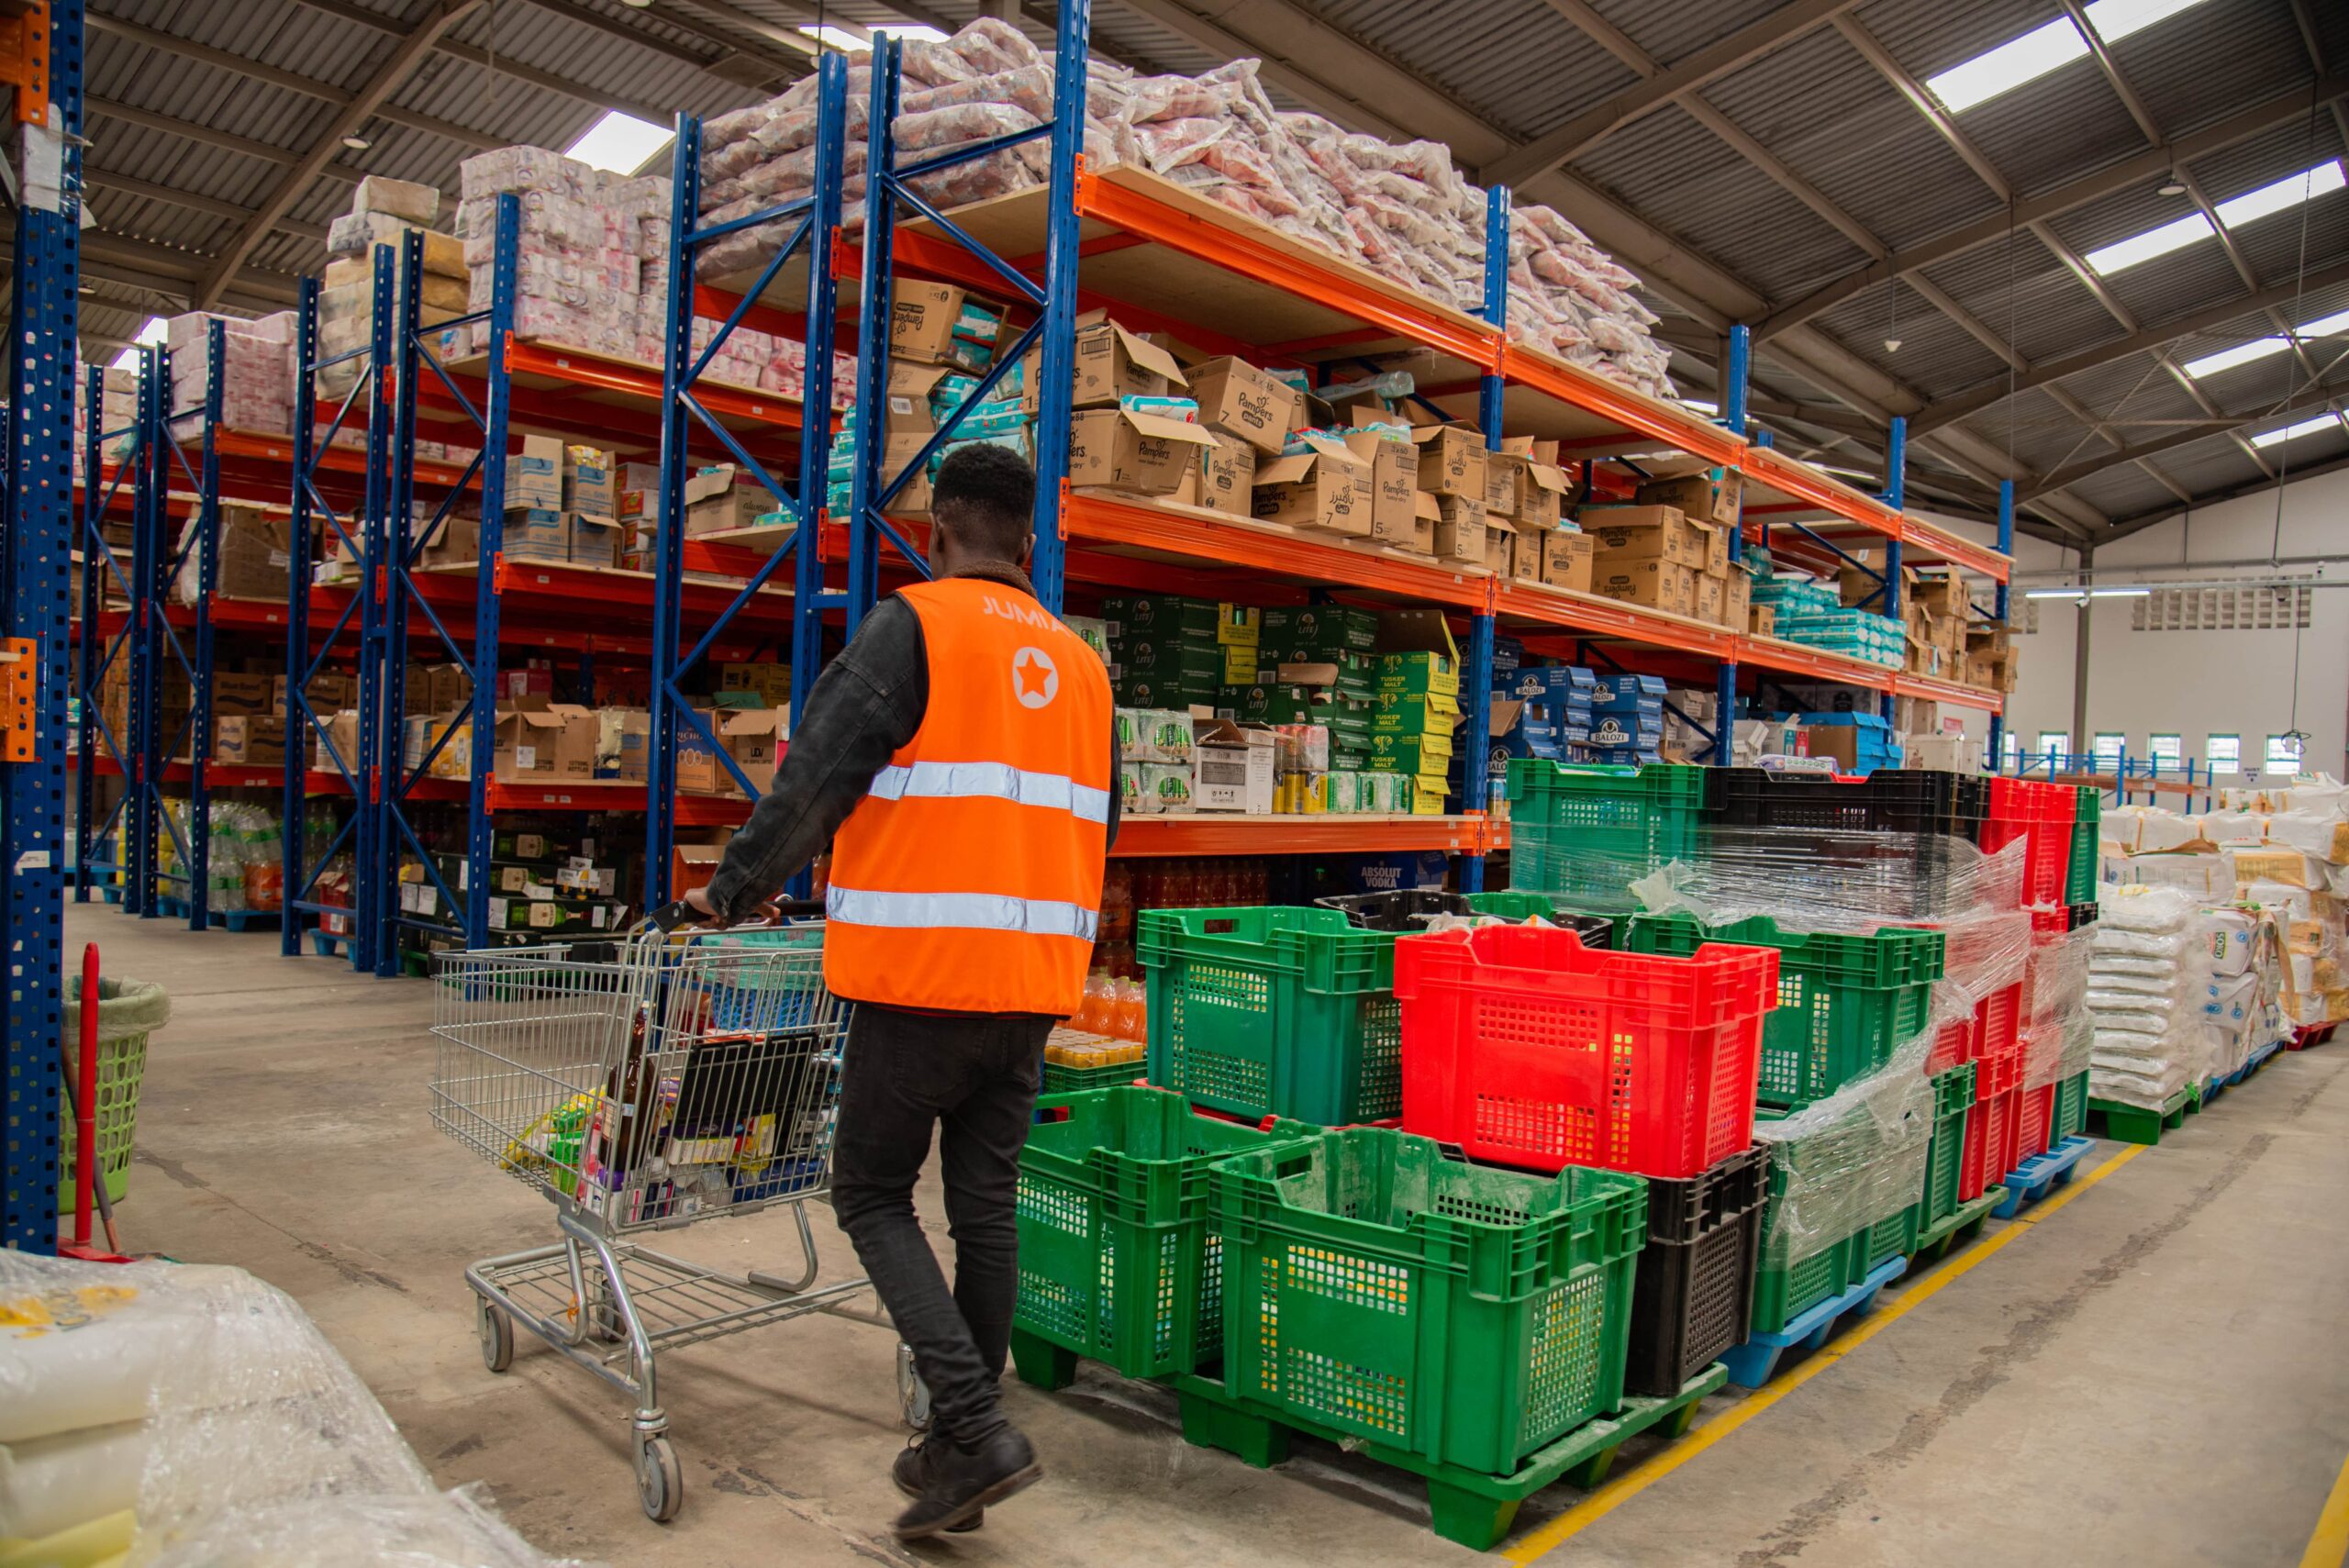 Jumia Launches An Integrated Warehouse And Logistics Network Facility